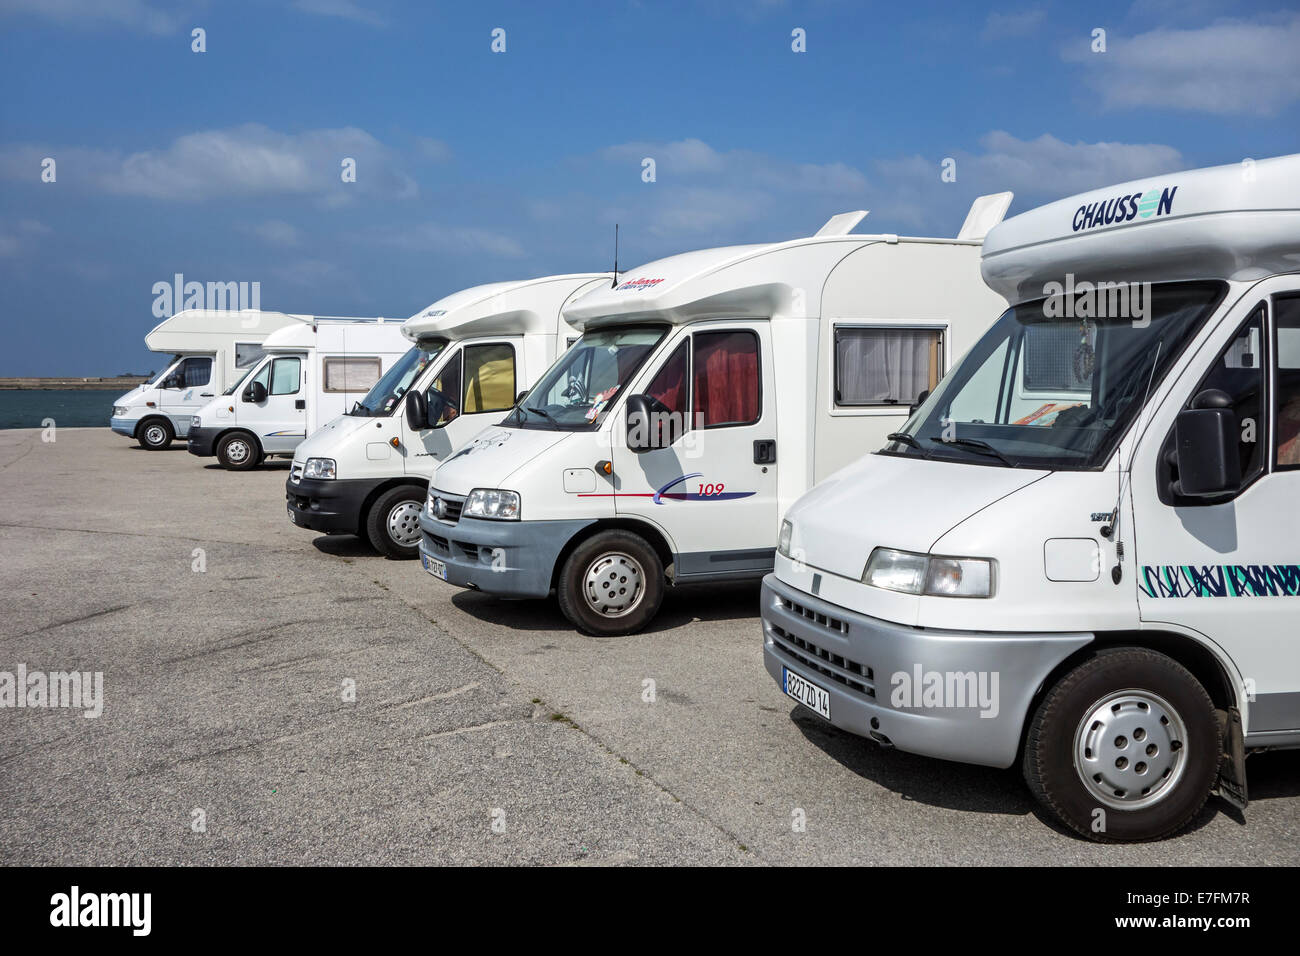 Row of motorhomes parked in car park for RVs / recreational vehicle along the coast with view over the sea Stock Photo